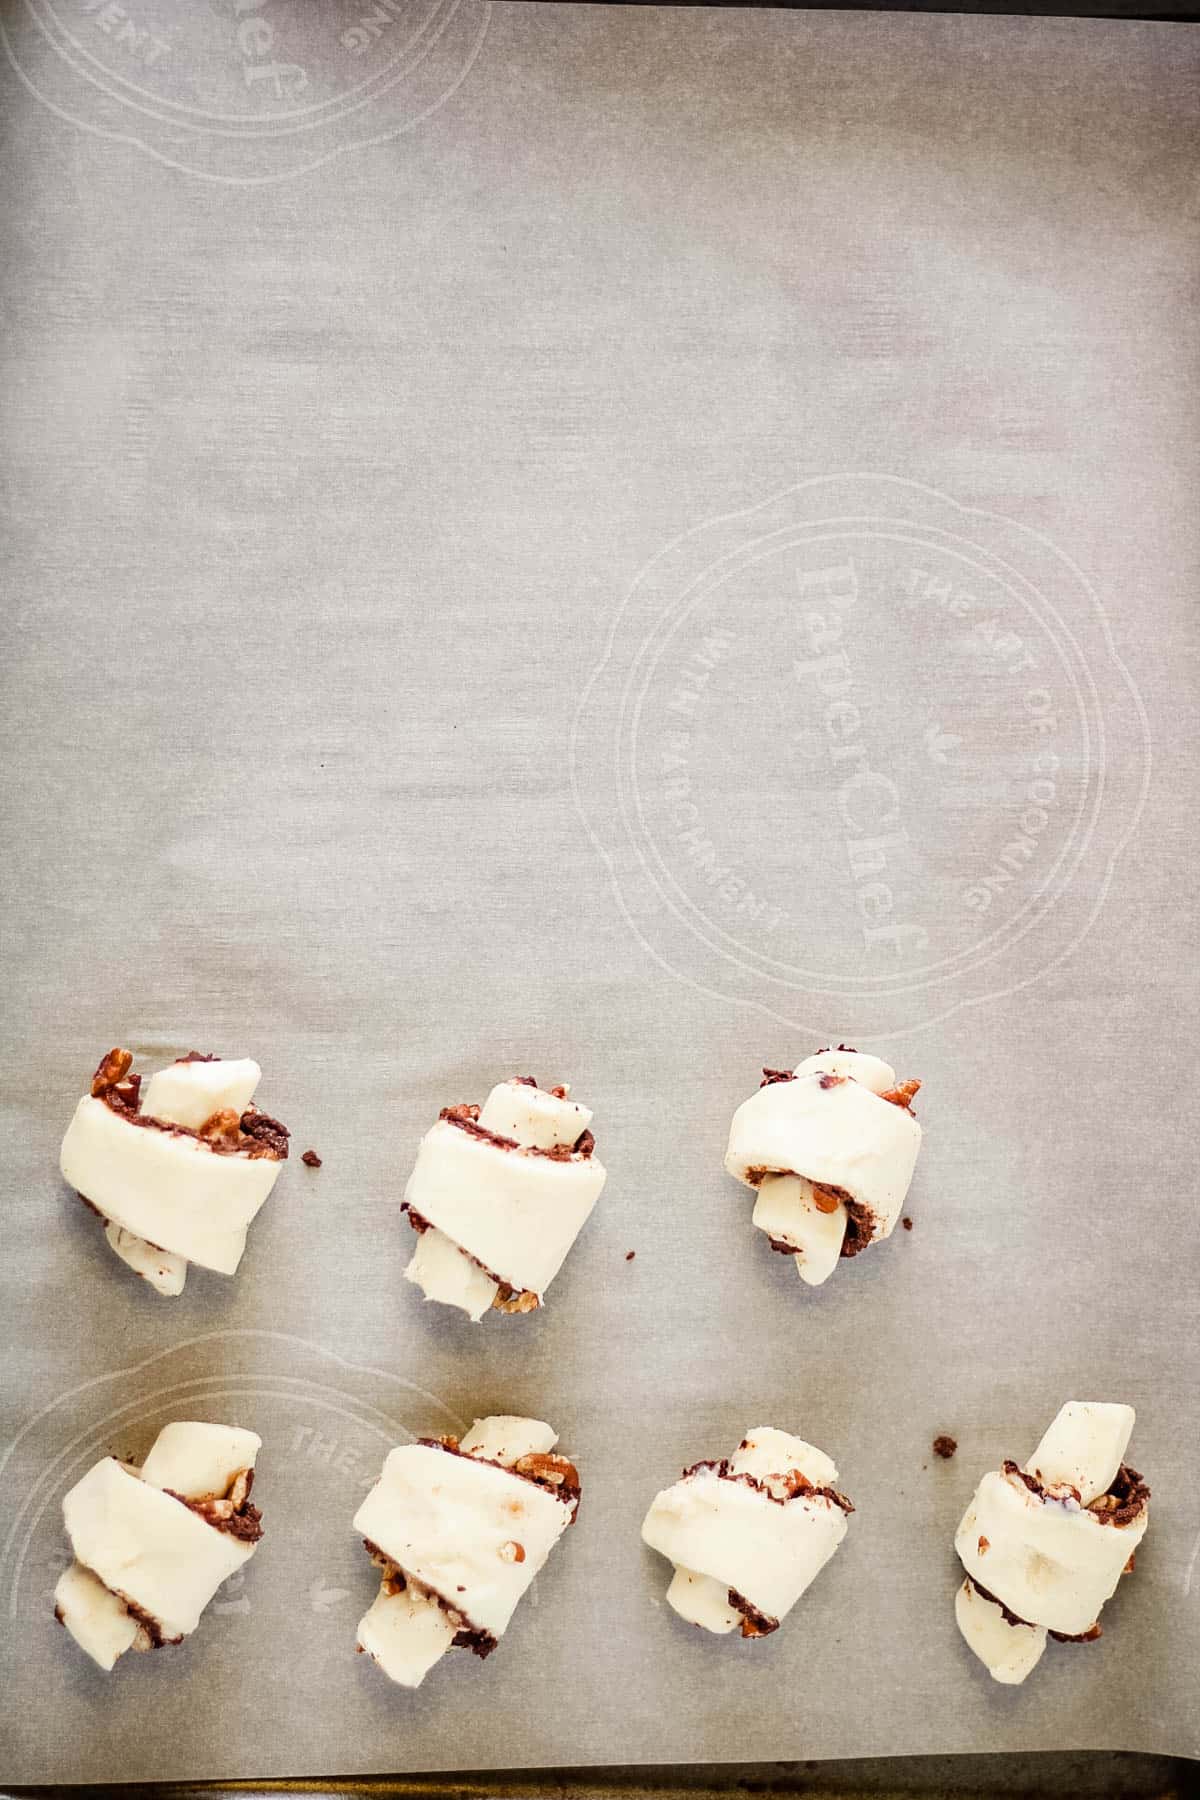 A baking sheet with rugelach cookies on it.